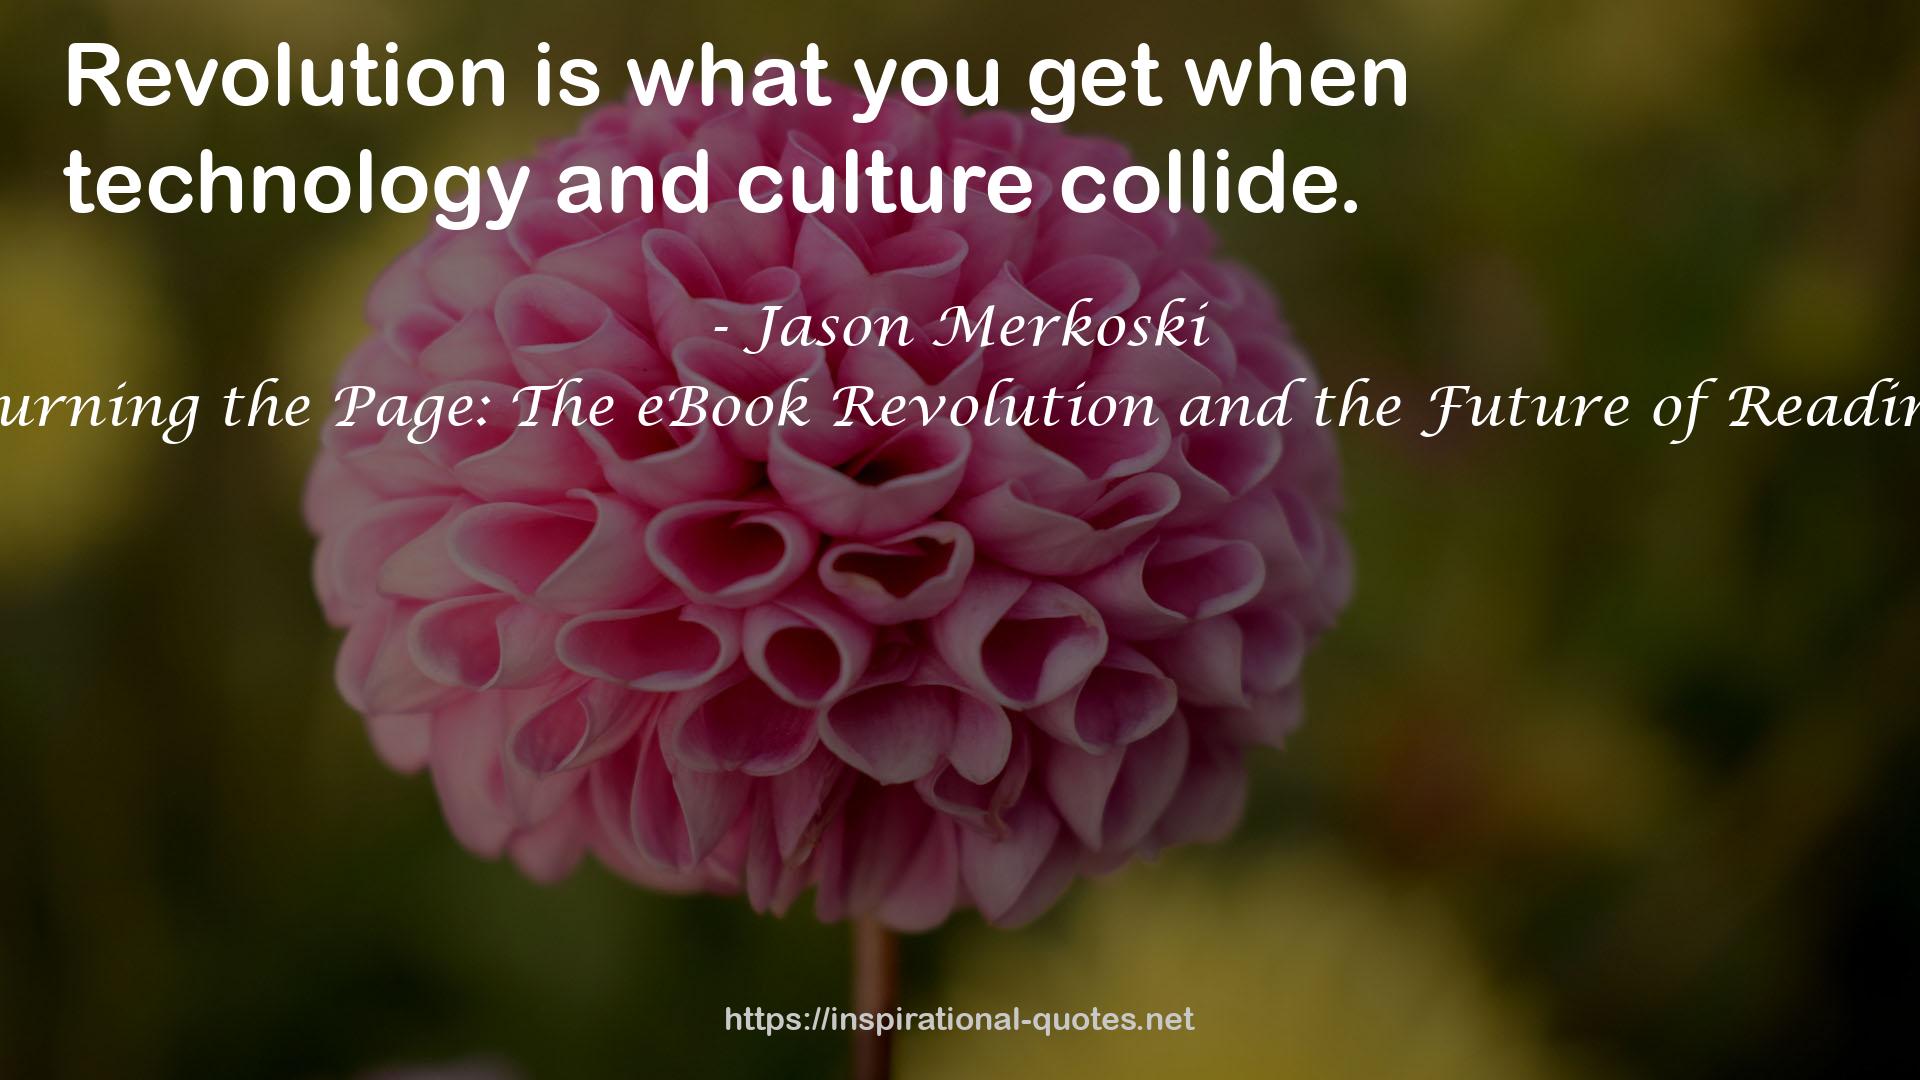 Burning the Page: The eBook Revolution and the Future of Reading QUOTES